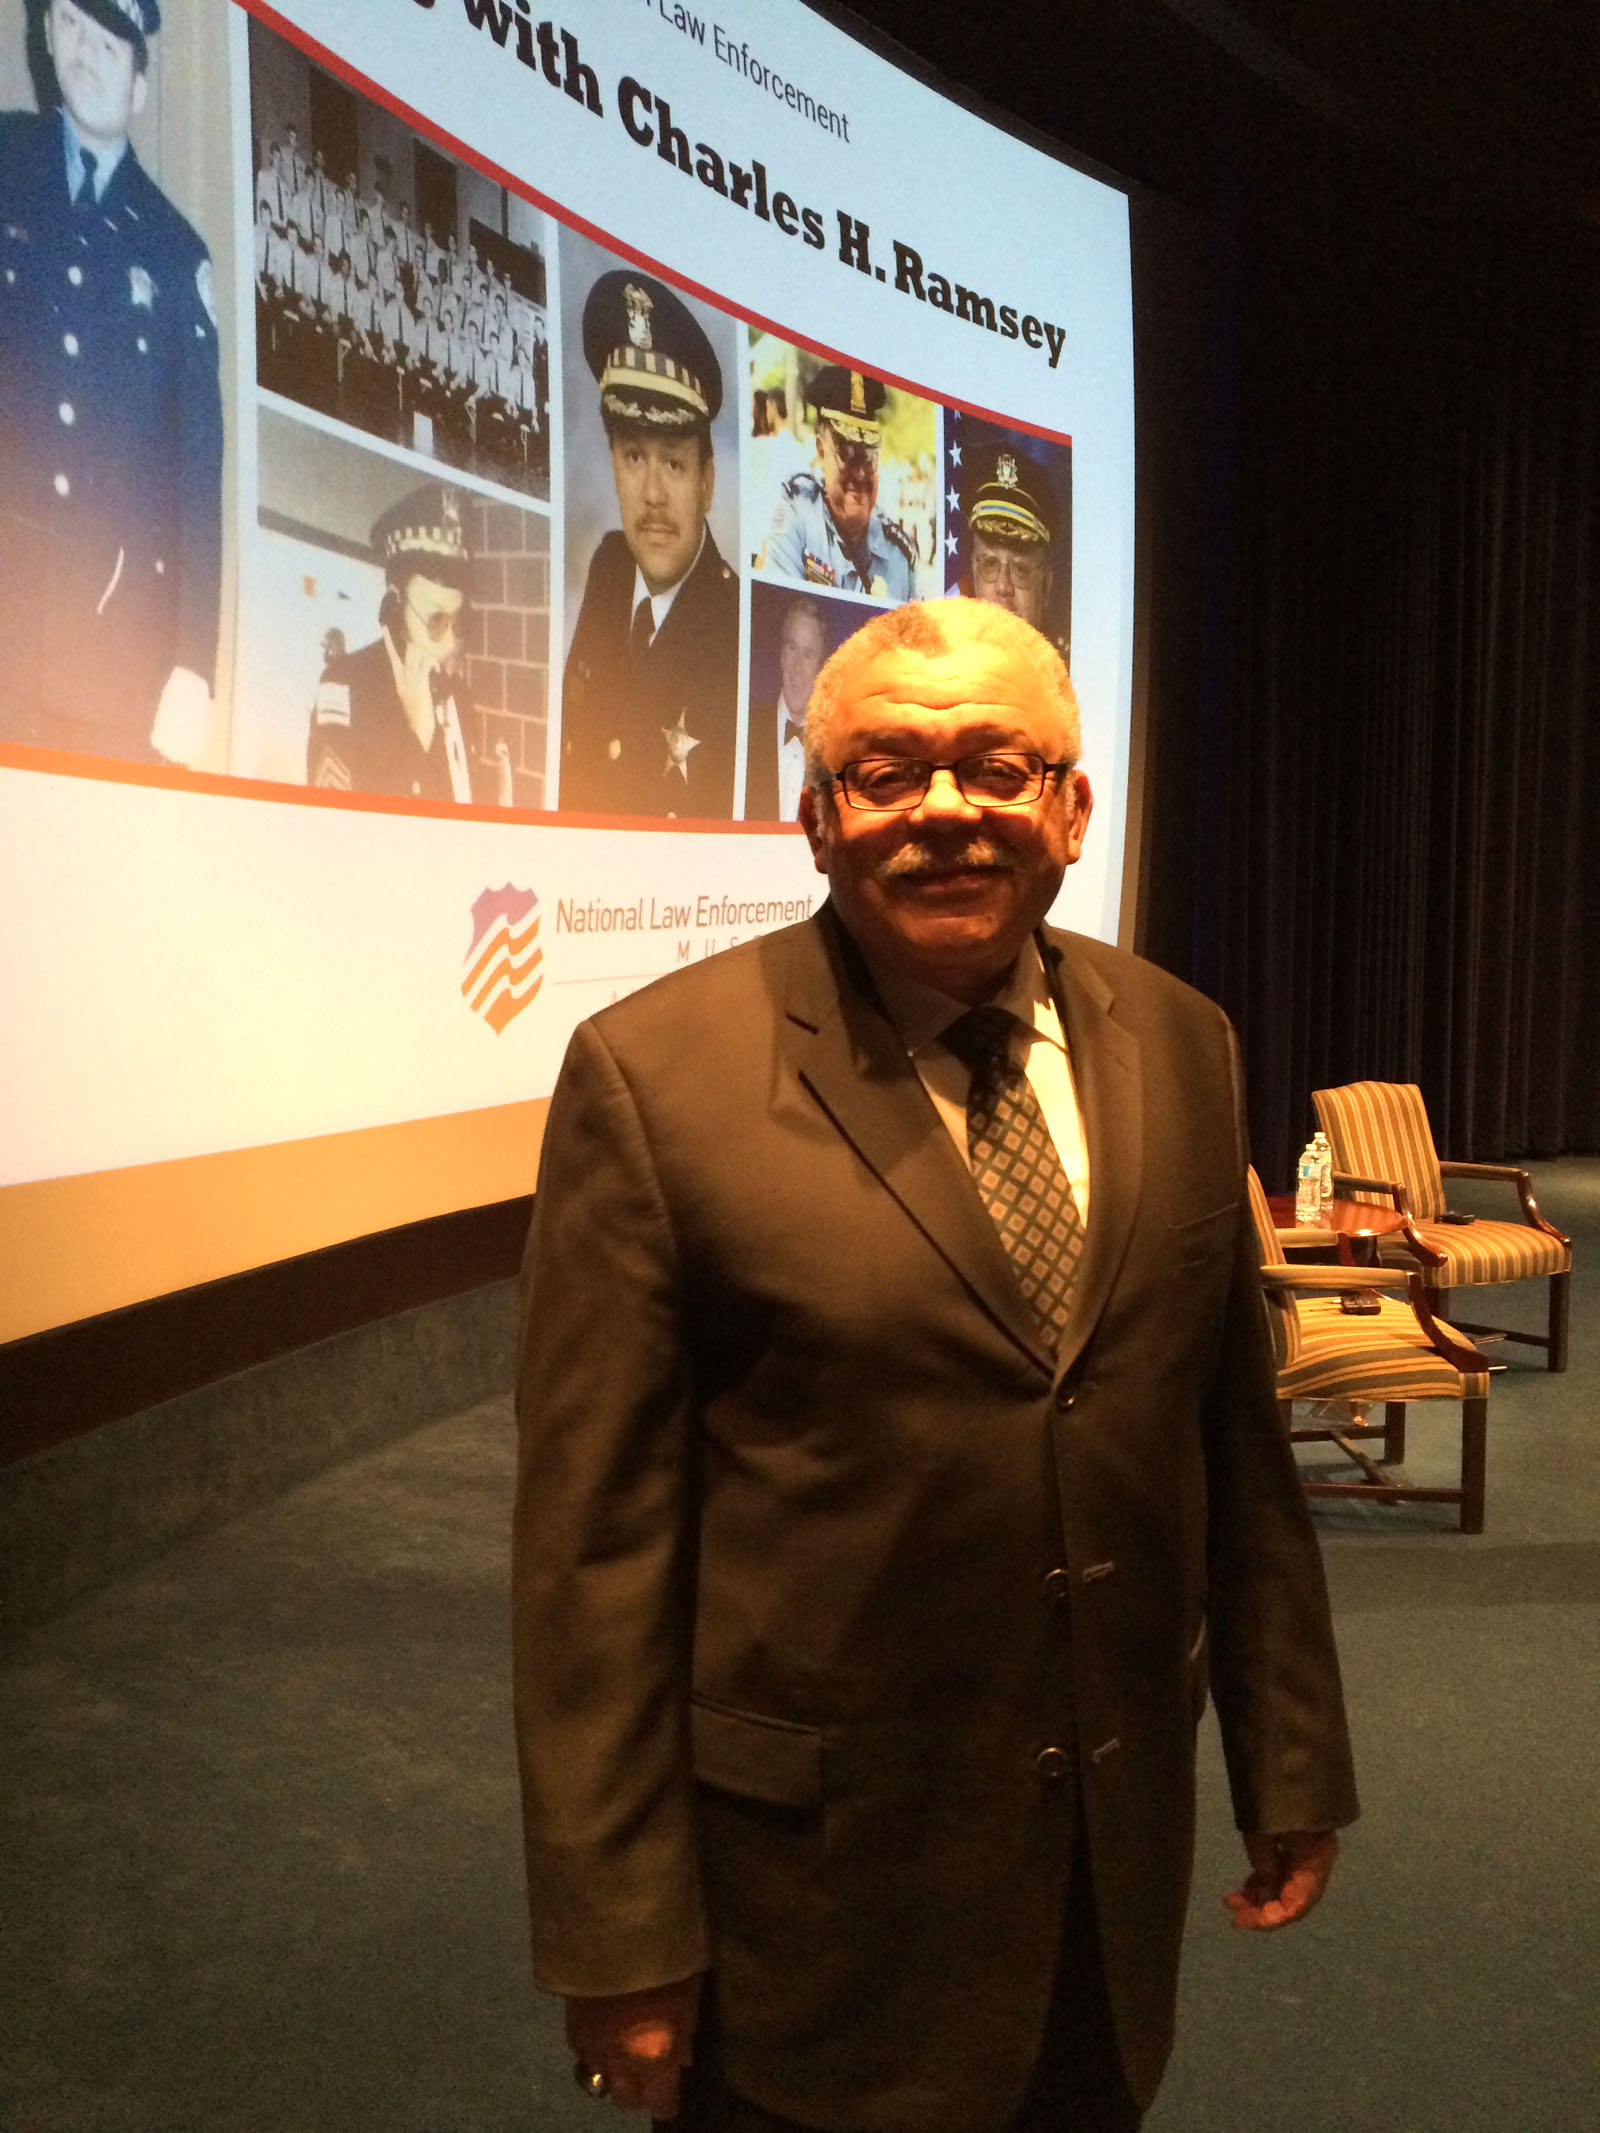 Former D.C. Police Chief sees opportunity in challenging times